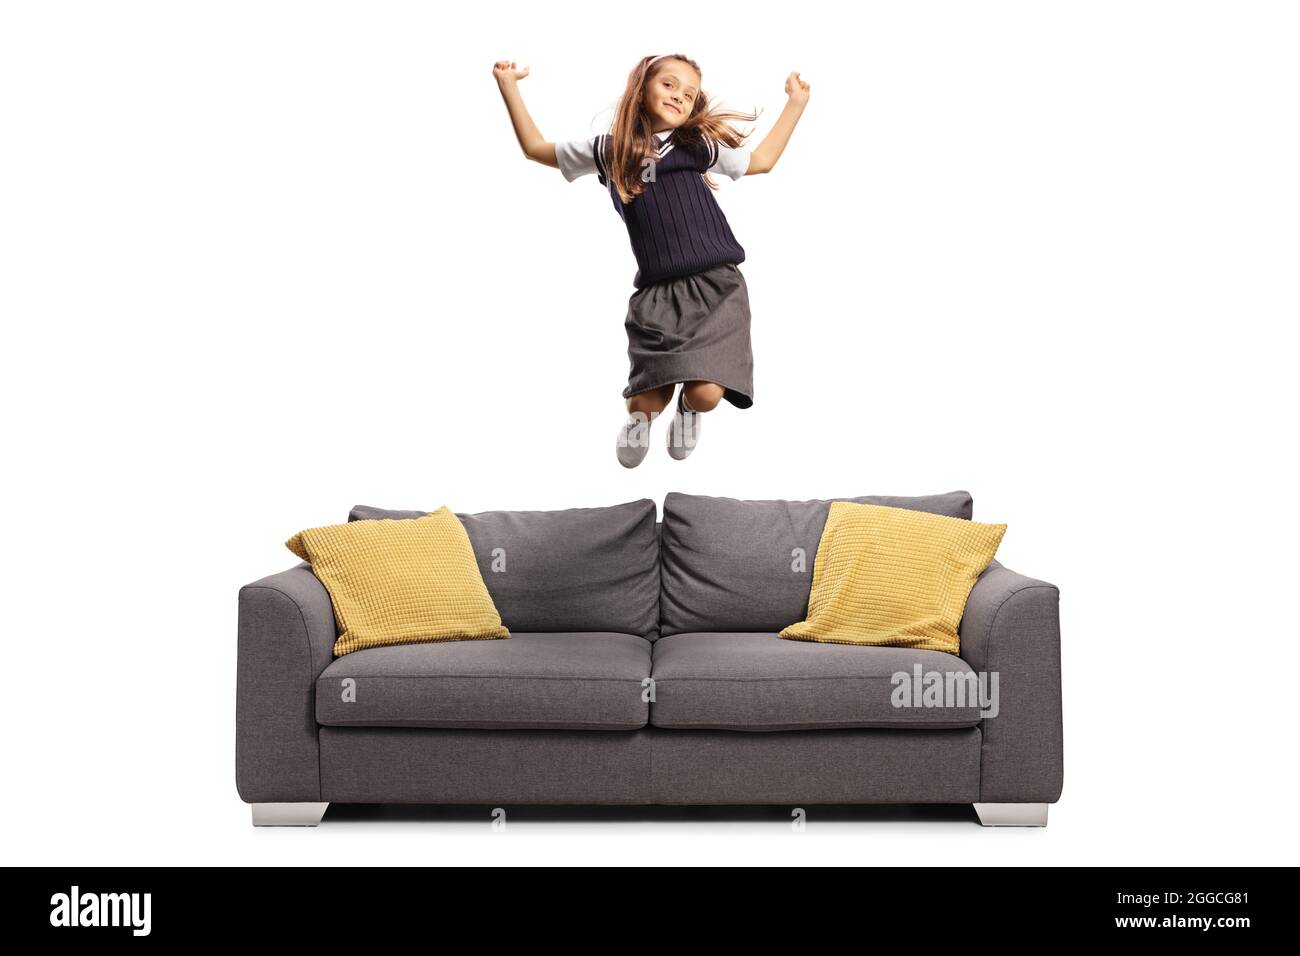 Happy schoolgirl in a uniform jumping on a sofa isolated on white background Stock Photo